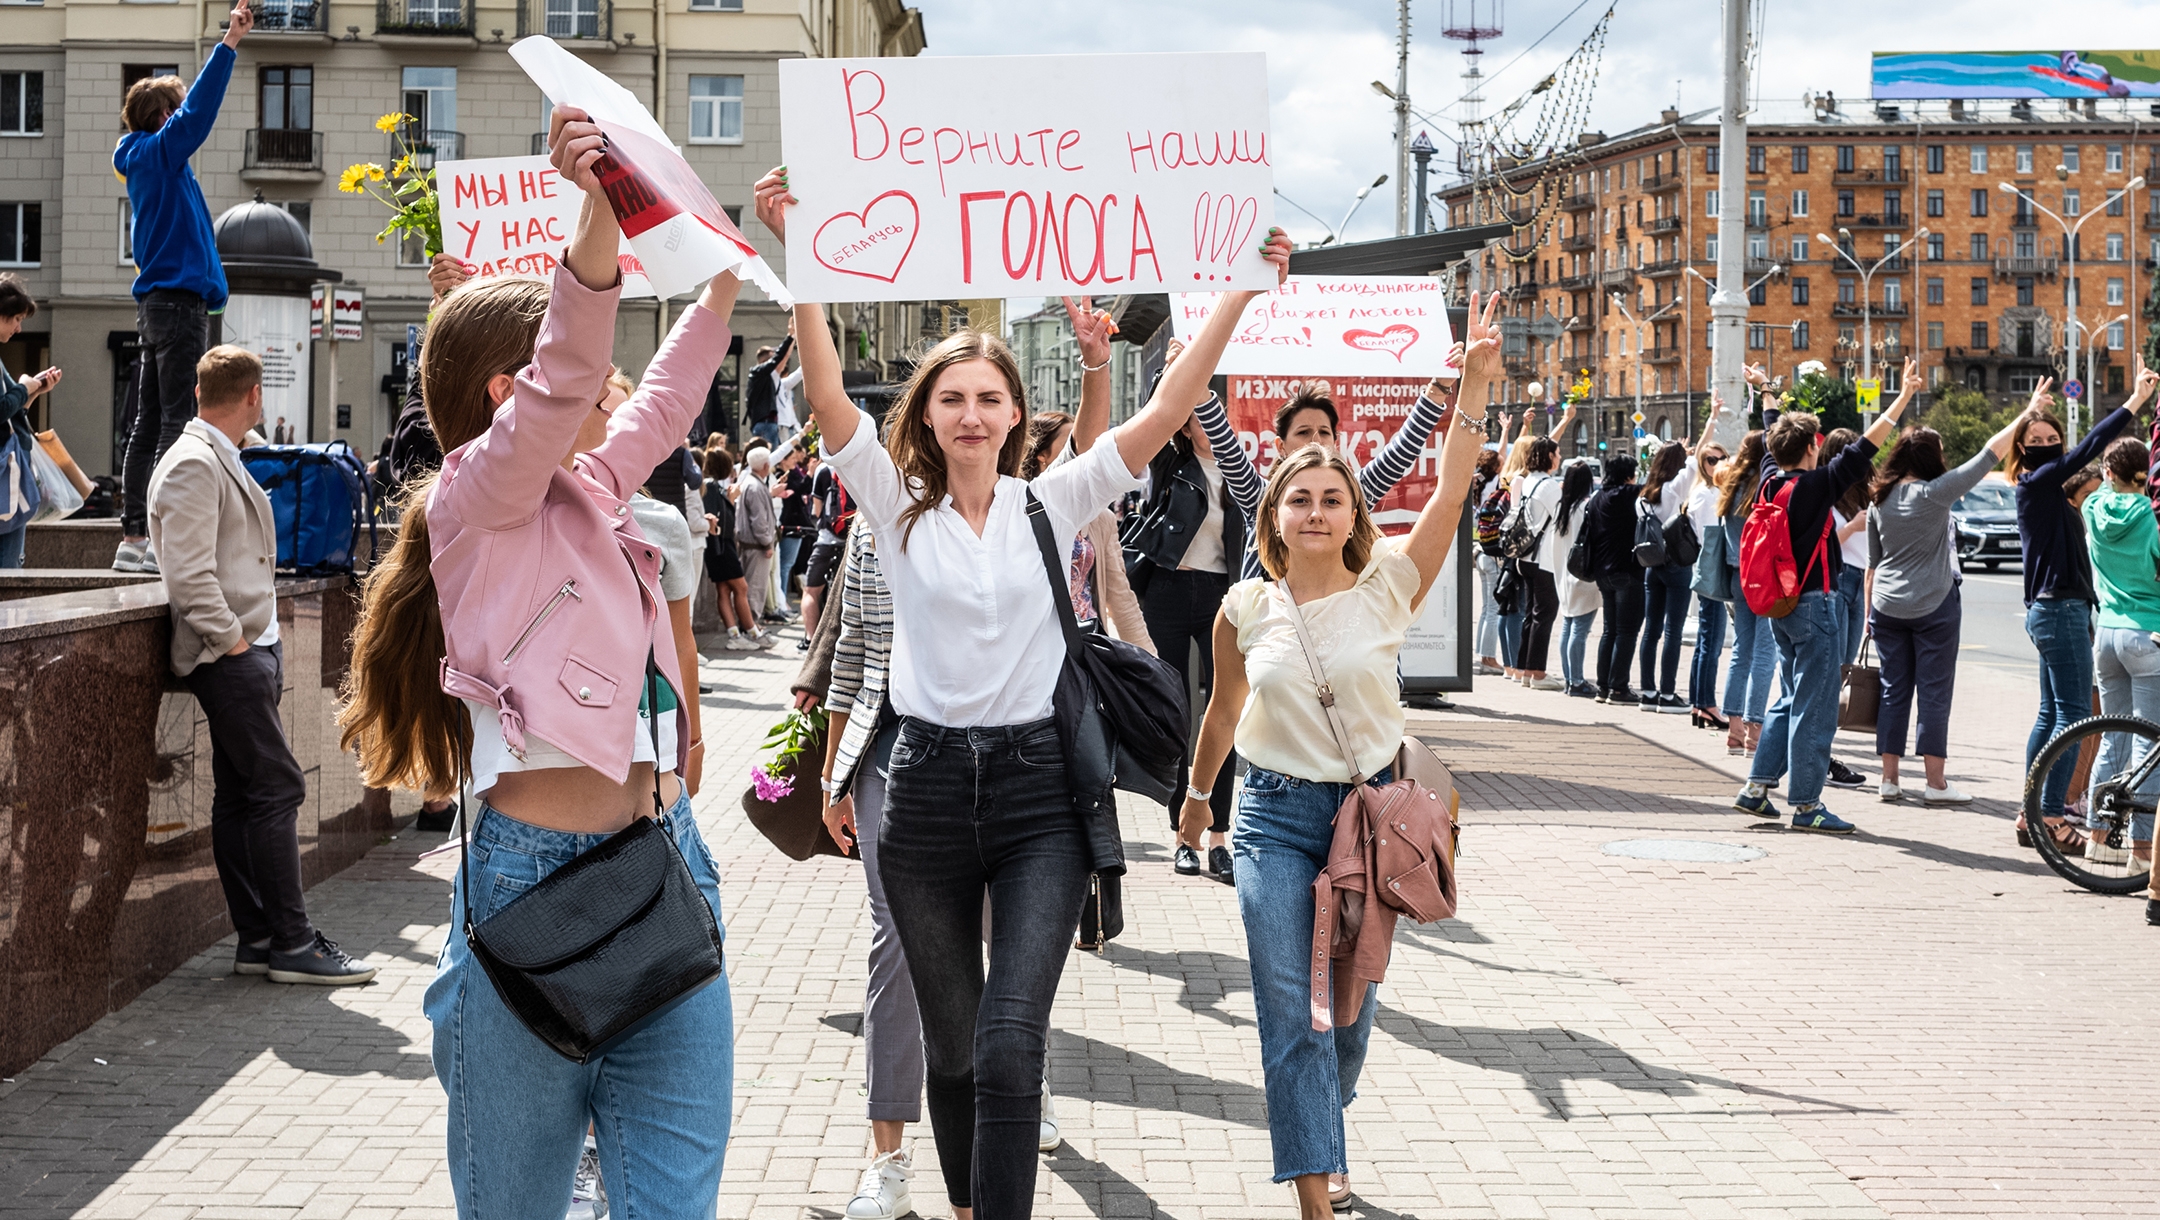 Protesters march through Minsk, Belarus on Aug, 13, 2020. (Misha Friedman/Getty Images)